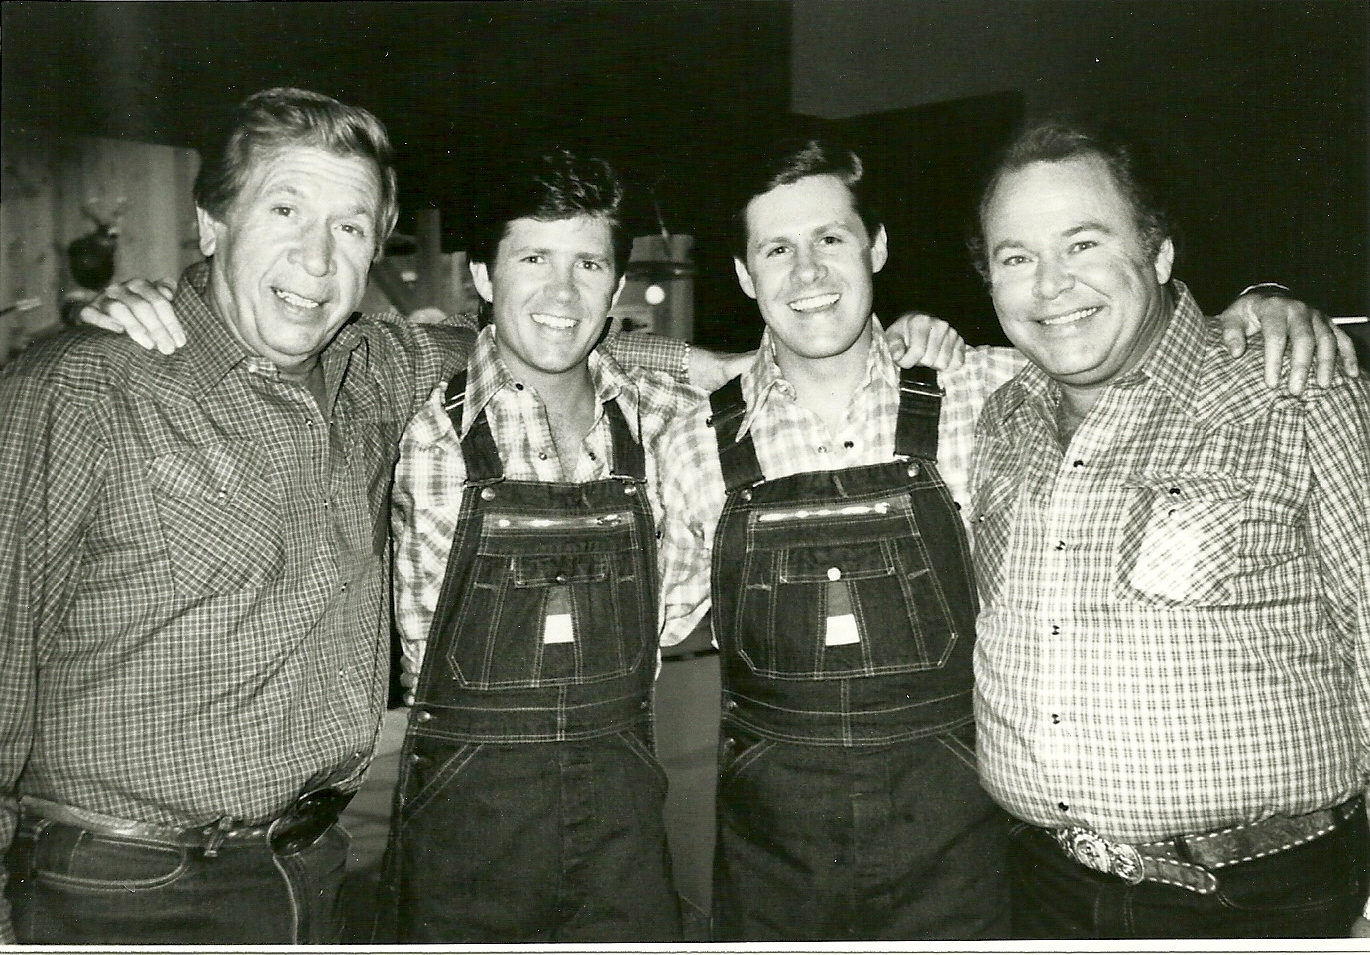 Buck Owens, Butch McCain, Ben McCain and Roy Clark on the set of Hee Haw in Nashville. The McCain Brothers saluted their hometown, Bovina, Texas.